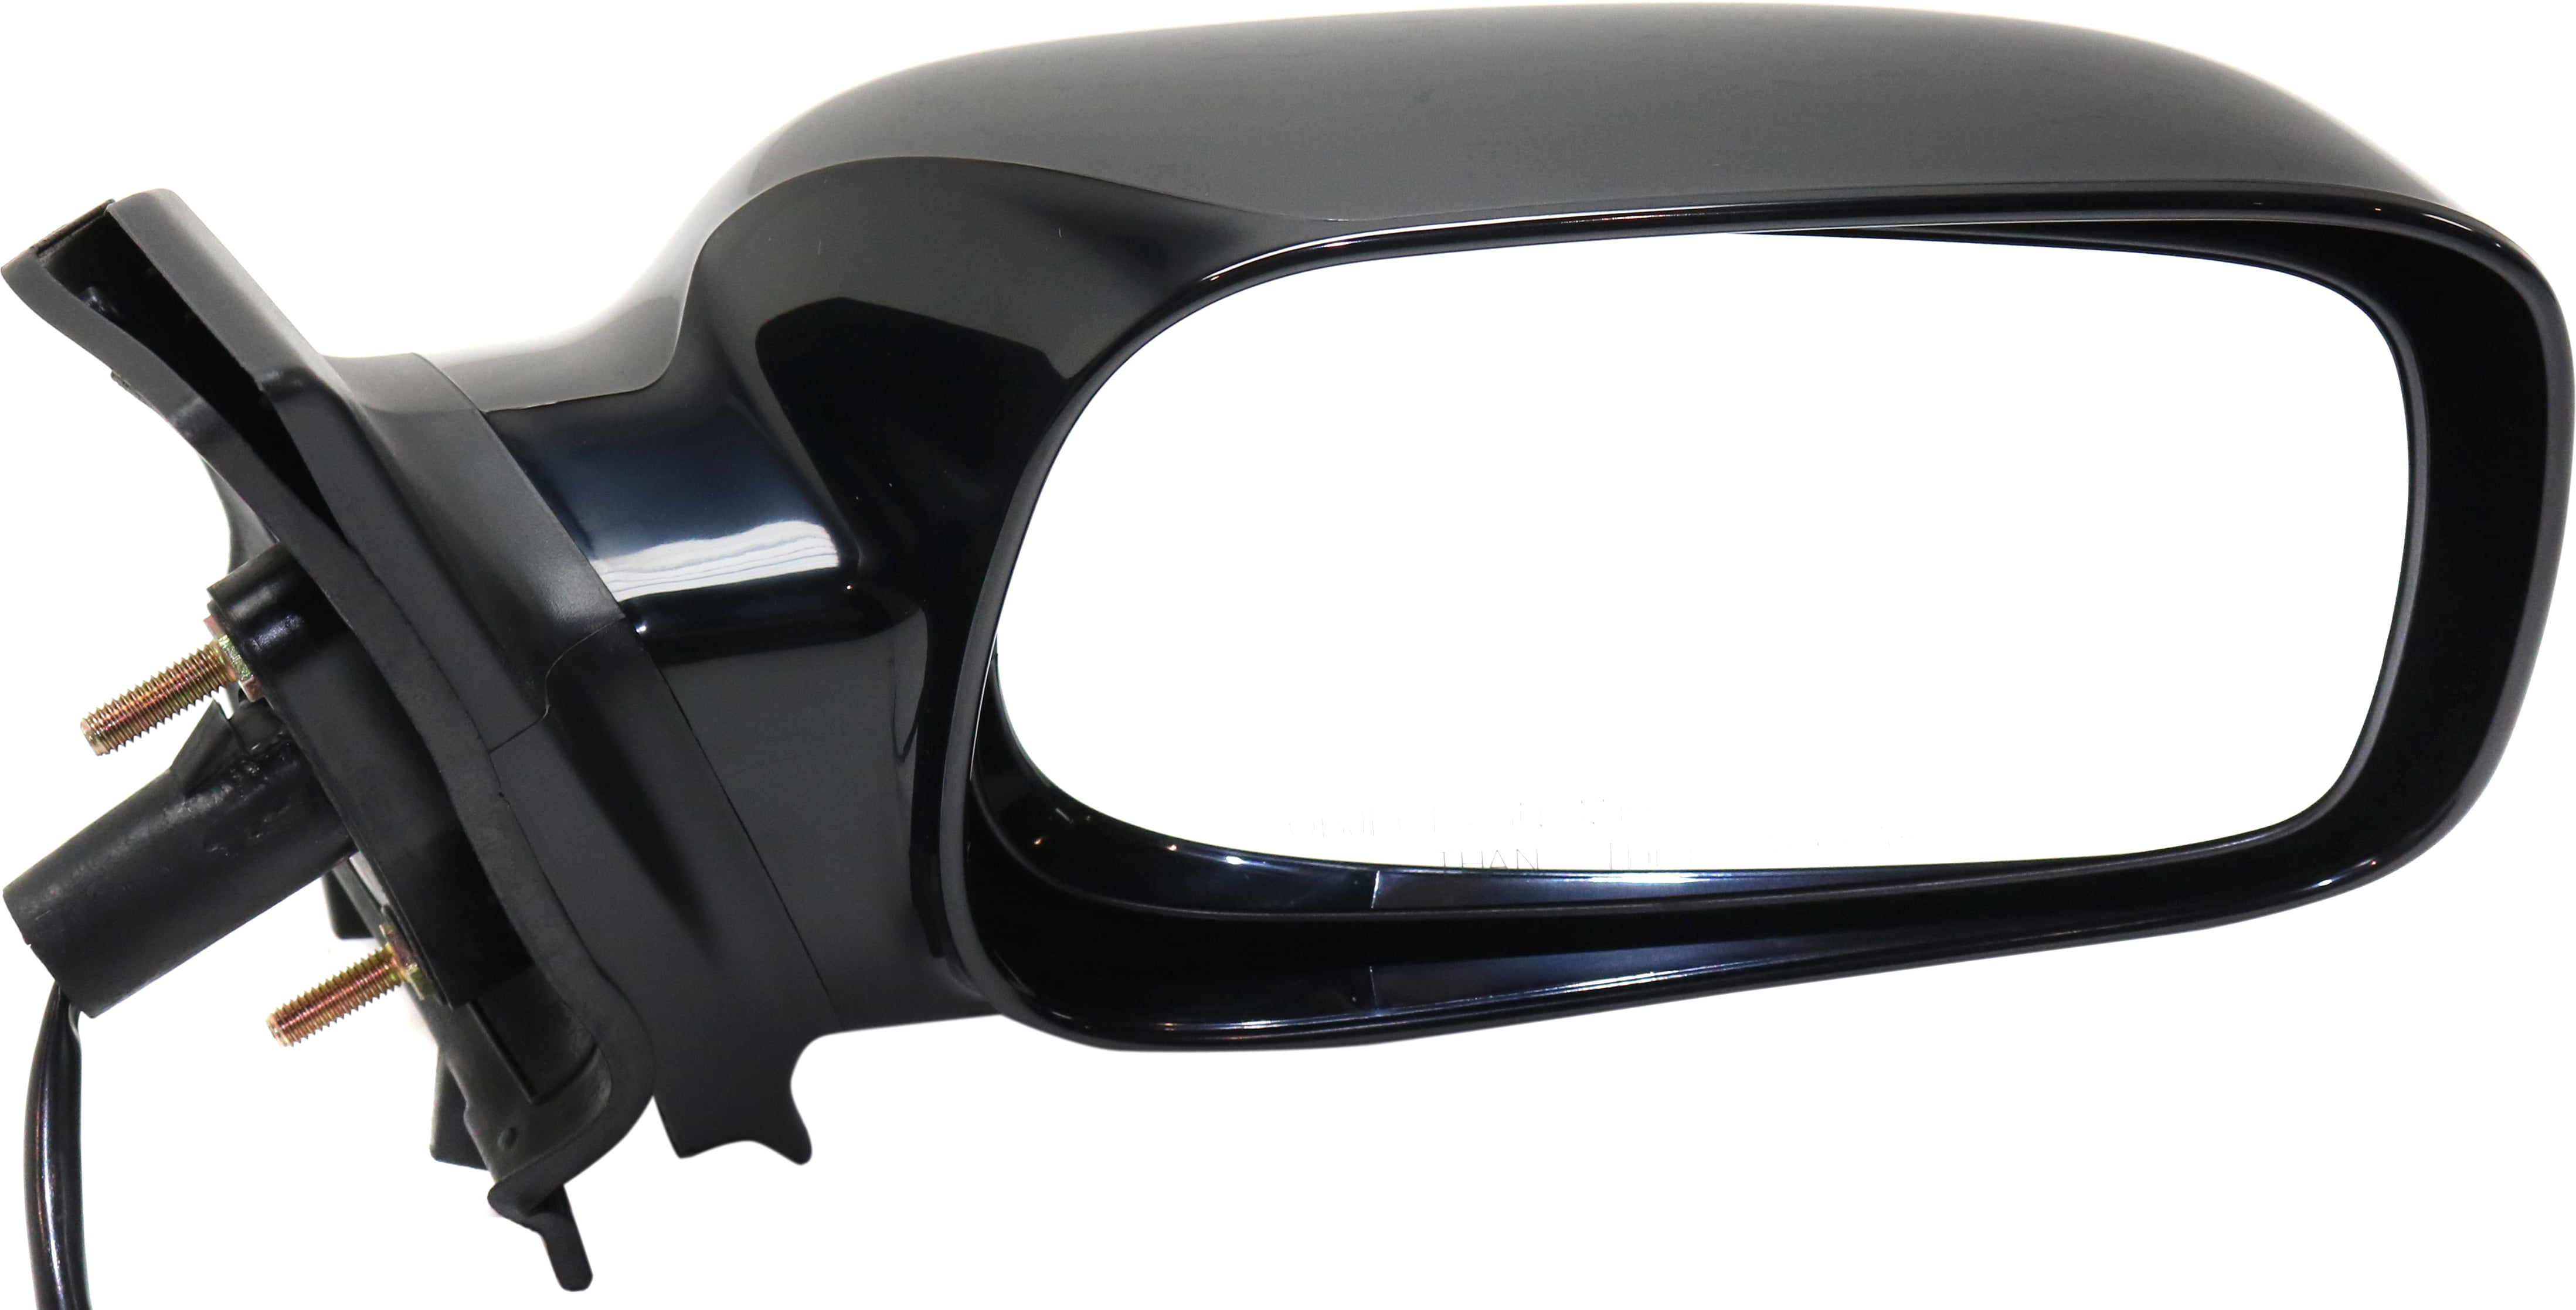 Passenger Side View Right RH 2018-21 Camry 2019-21 Avalon 2016-21 Prius No Blind Spot Mirror Glass for Toyota 2019-21 Corolla 